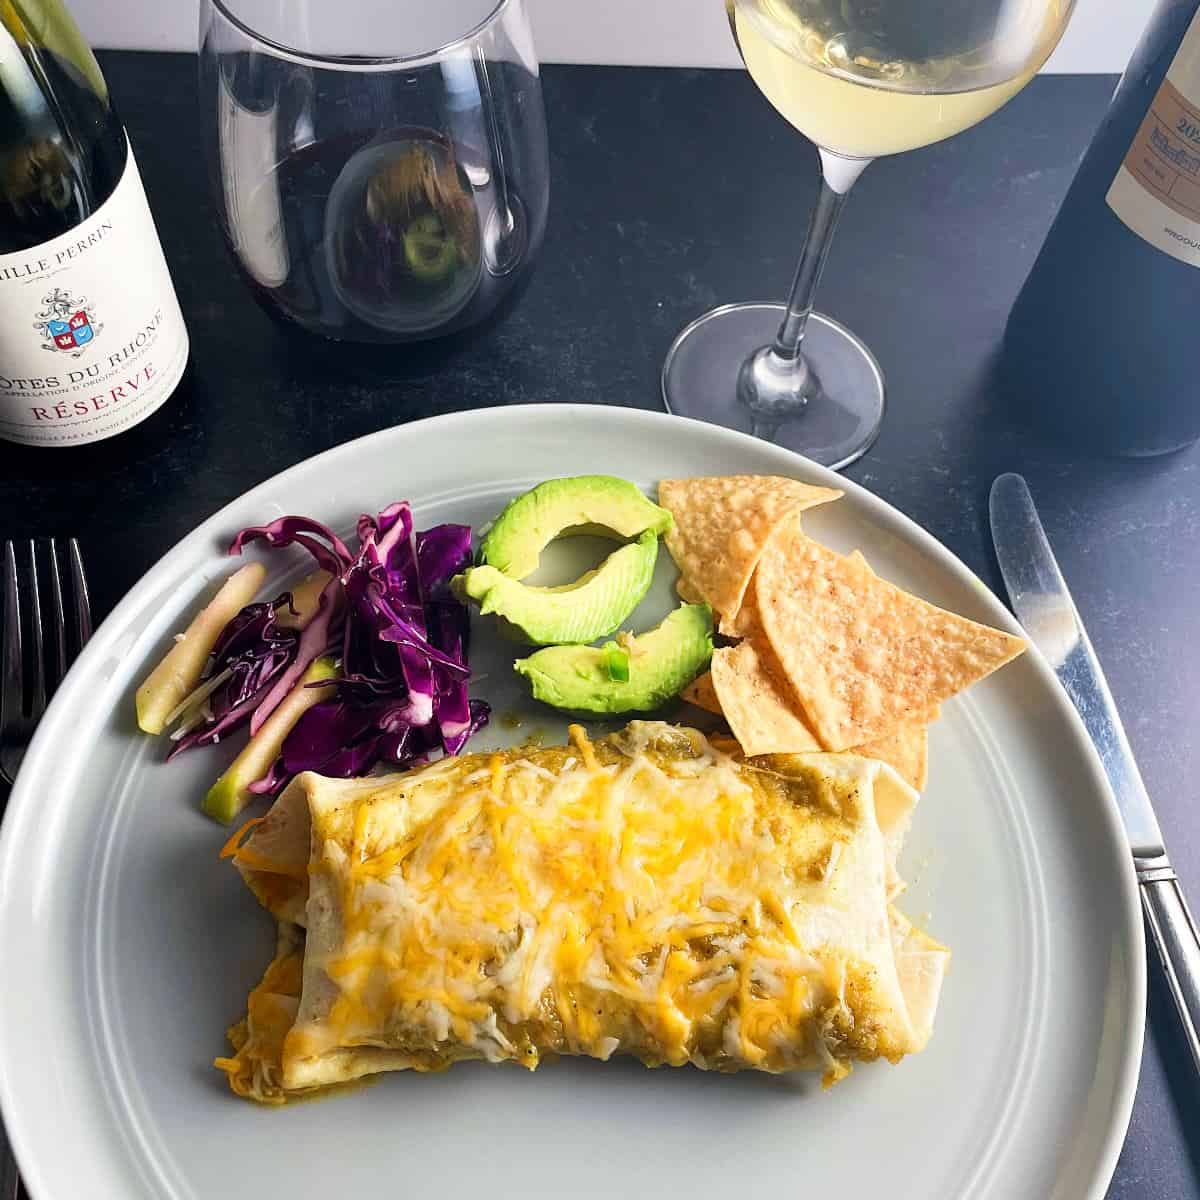 chicken and black bean enchiladas on a plate with red cabbage slaw and avocado slices. Red and white wine in the background.